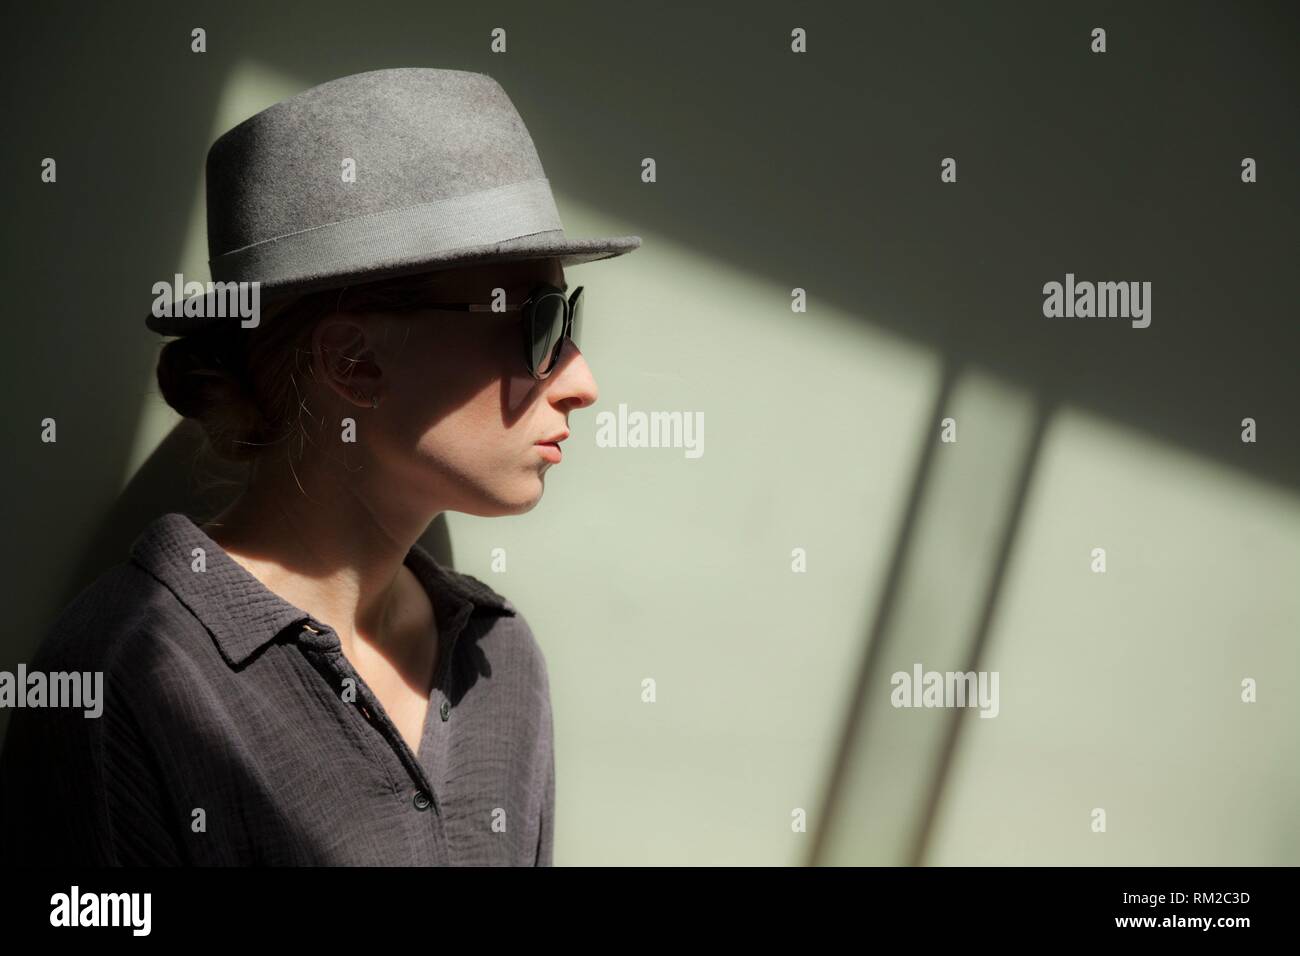 Young serious woman wearing a hat and sunglasses. Stock Photo